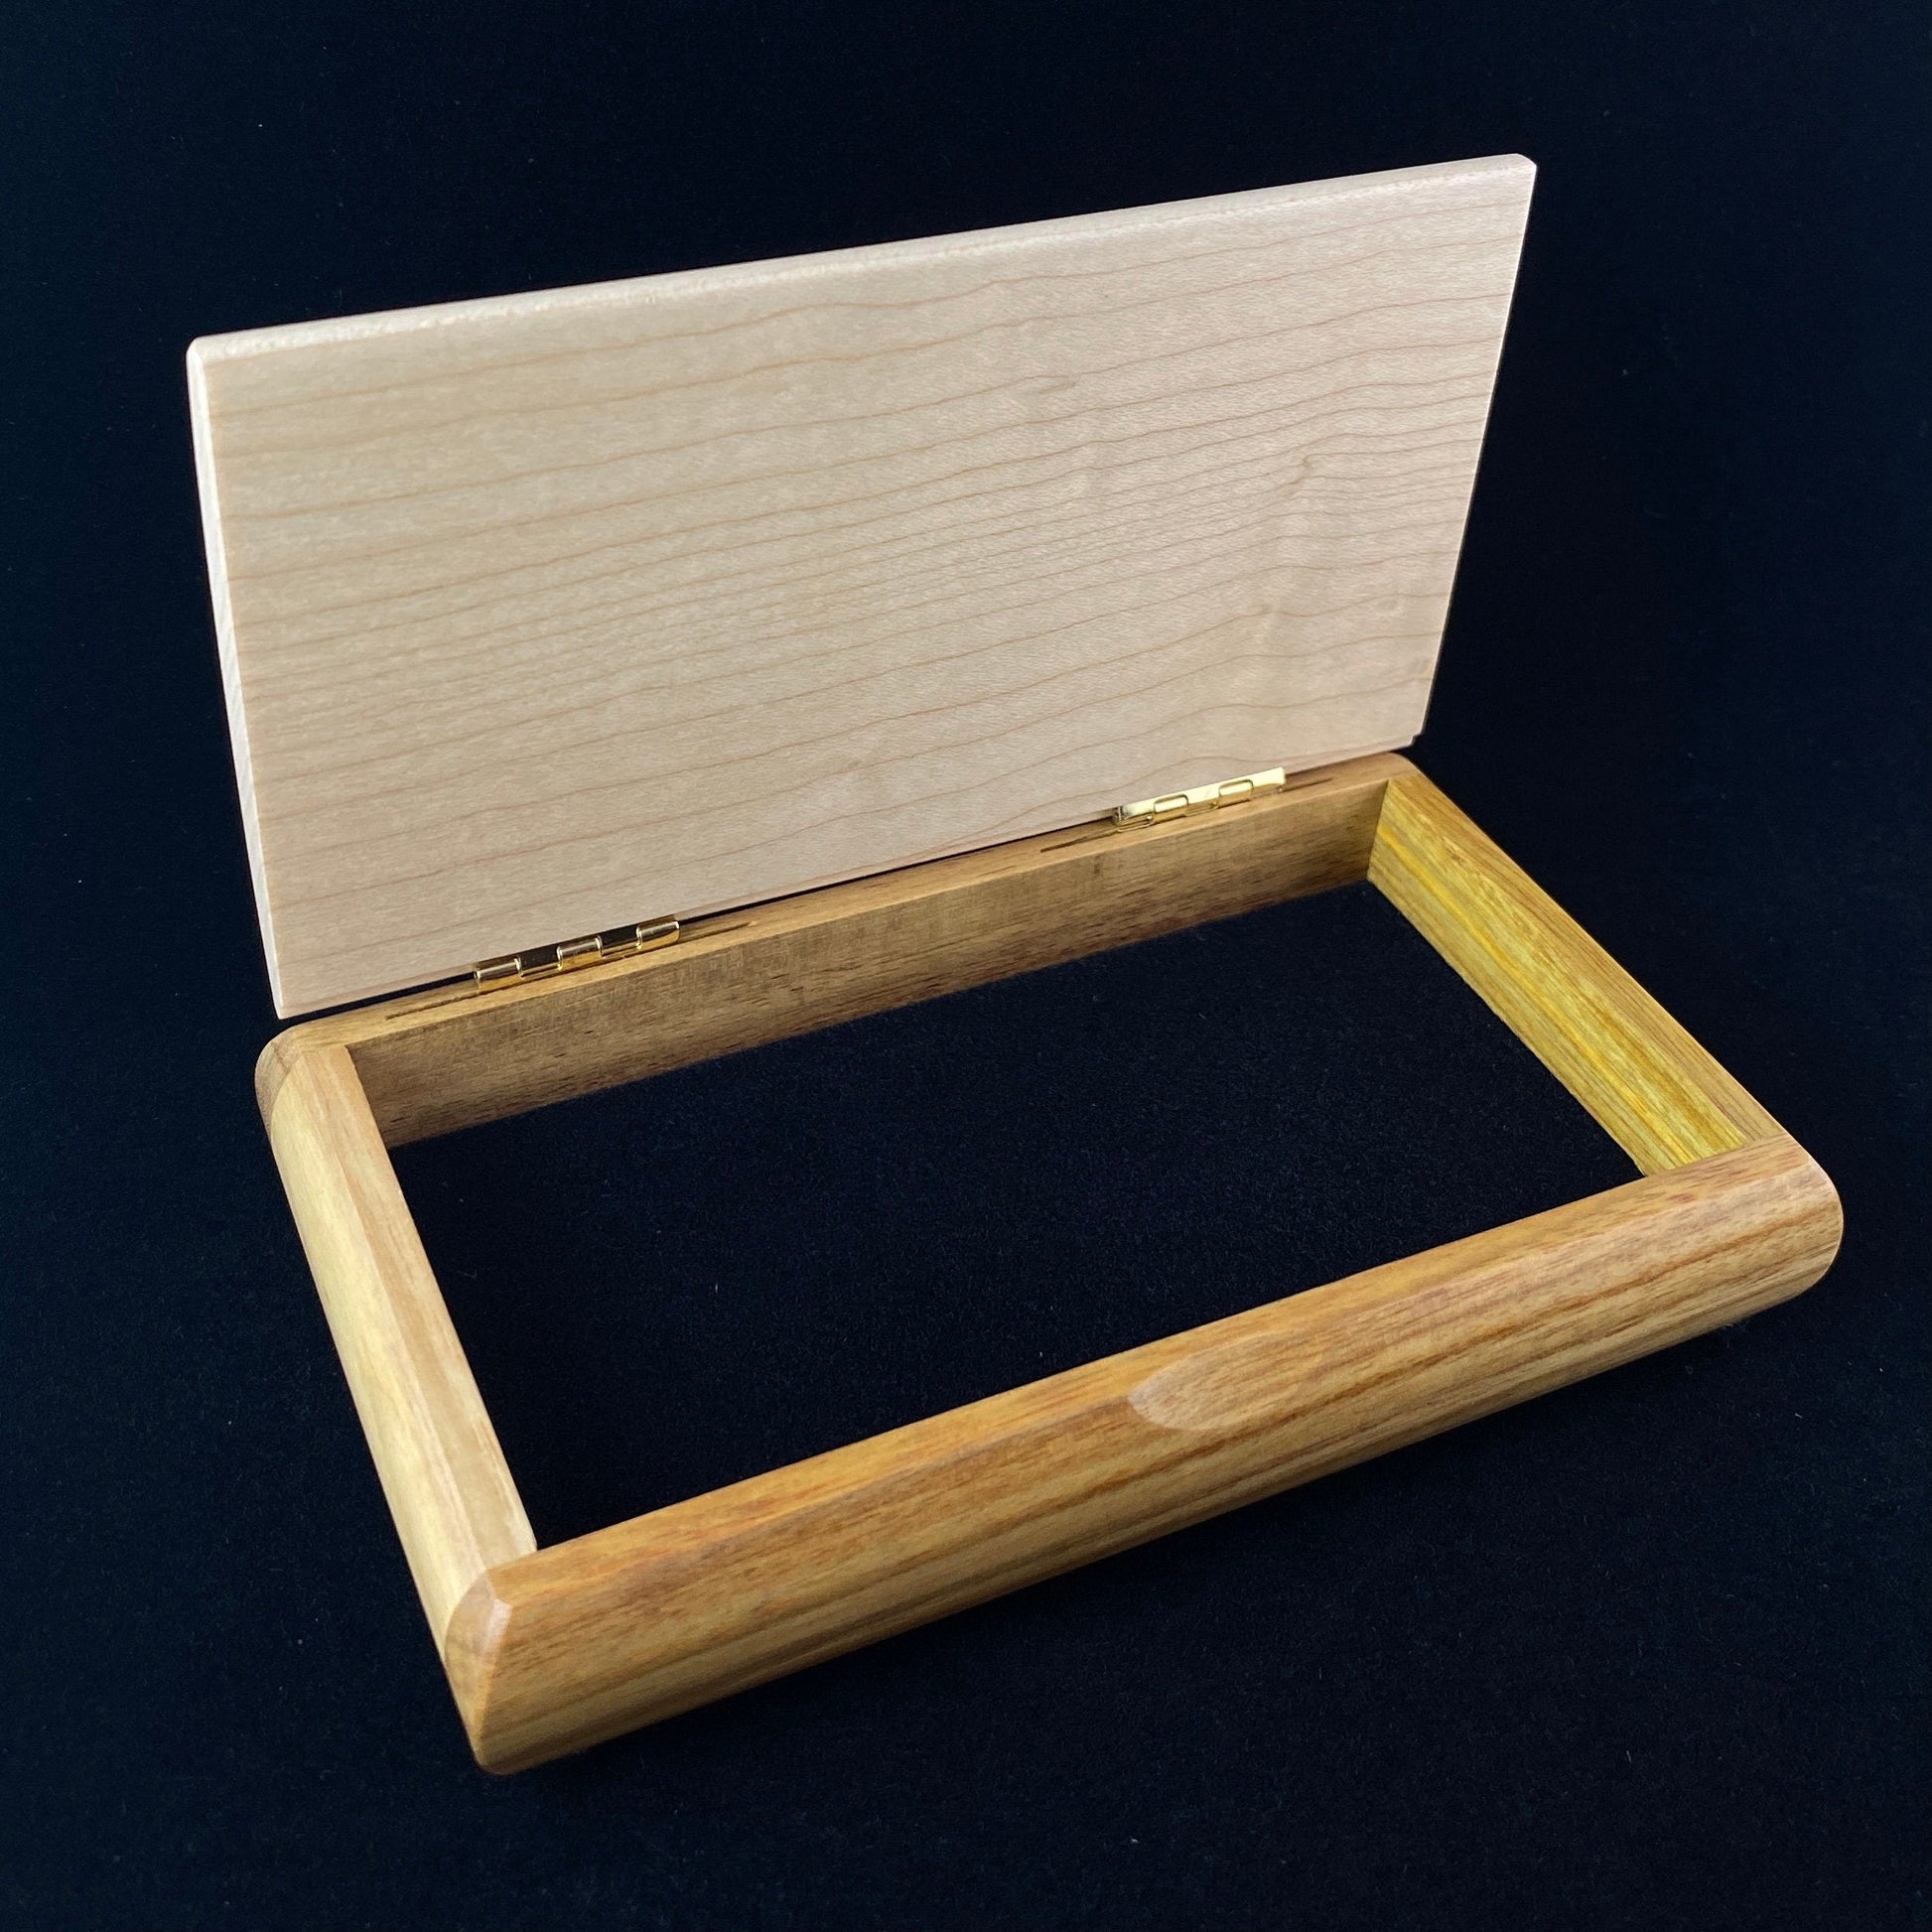 Great Lakes Handmade Wooden Box - Curly Maple and Canarywood